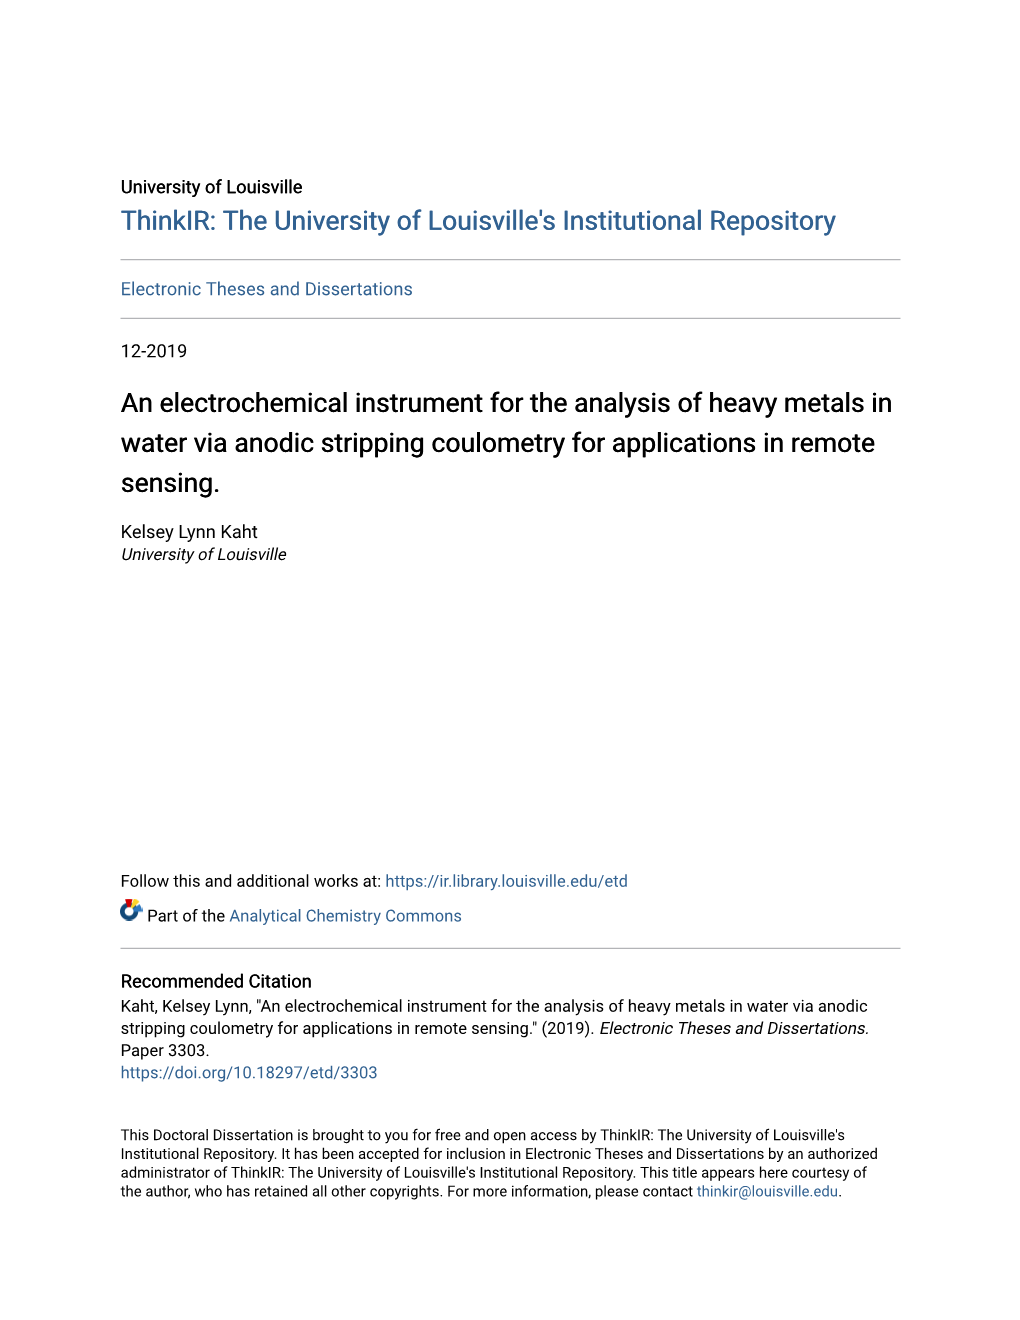 An Electrochemical Instrument for the Analysis of Heavy Metals in Water Via Anodic Stripping Coulometry for Applications in Remote Sensing